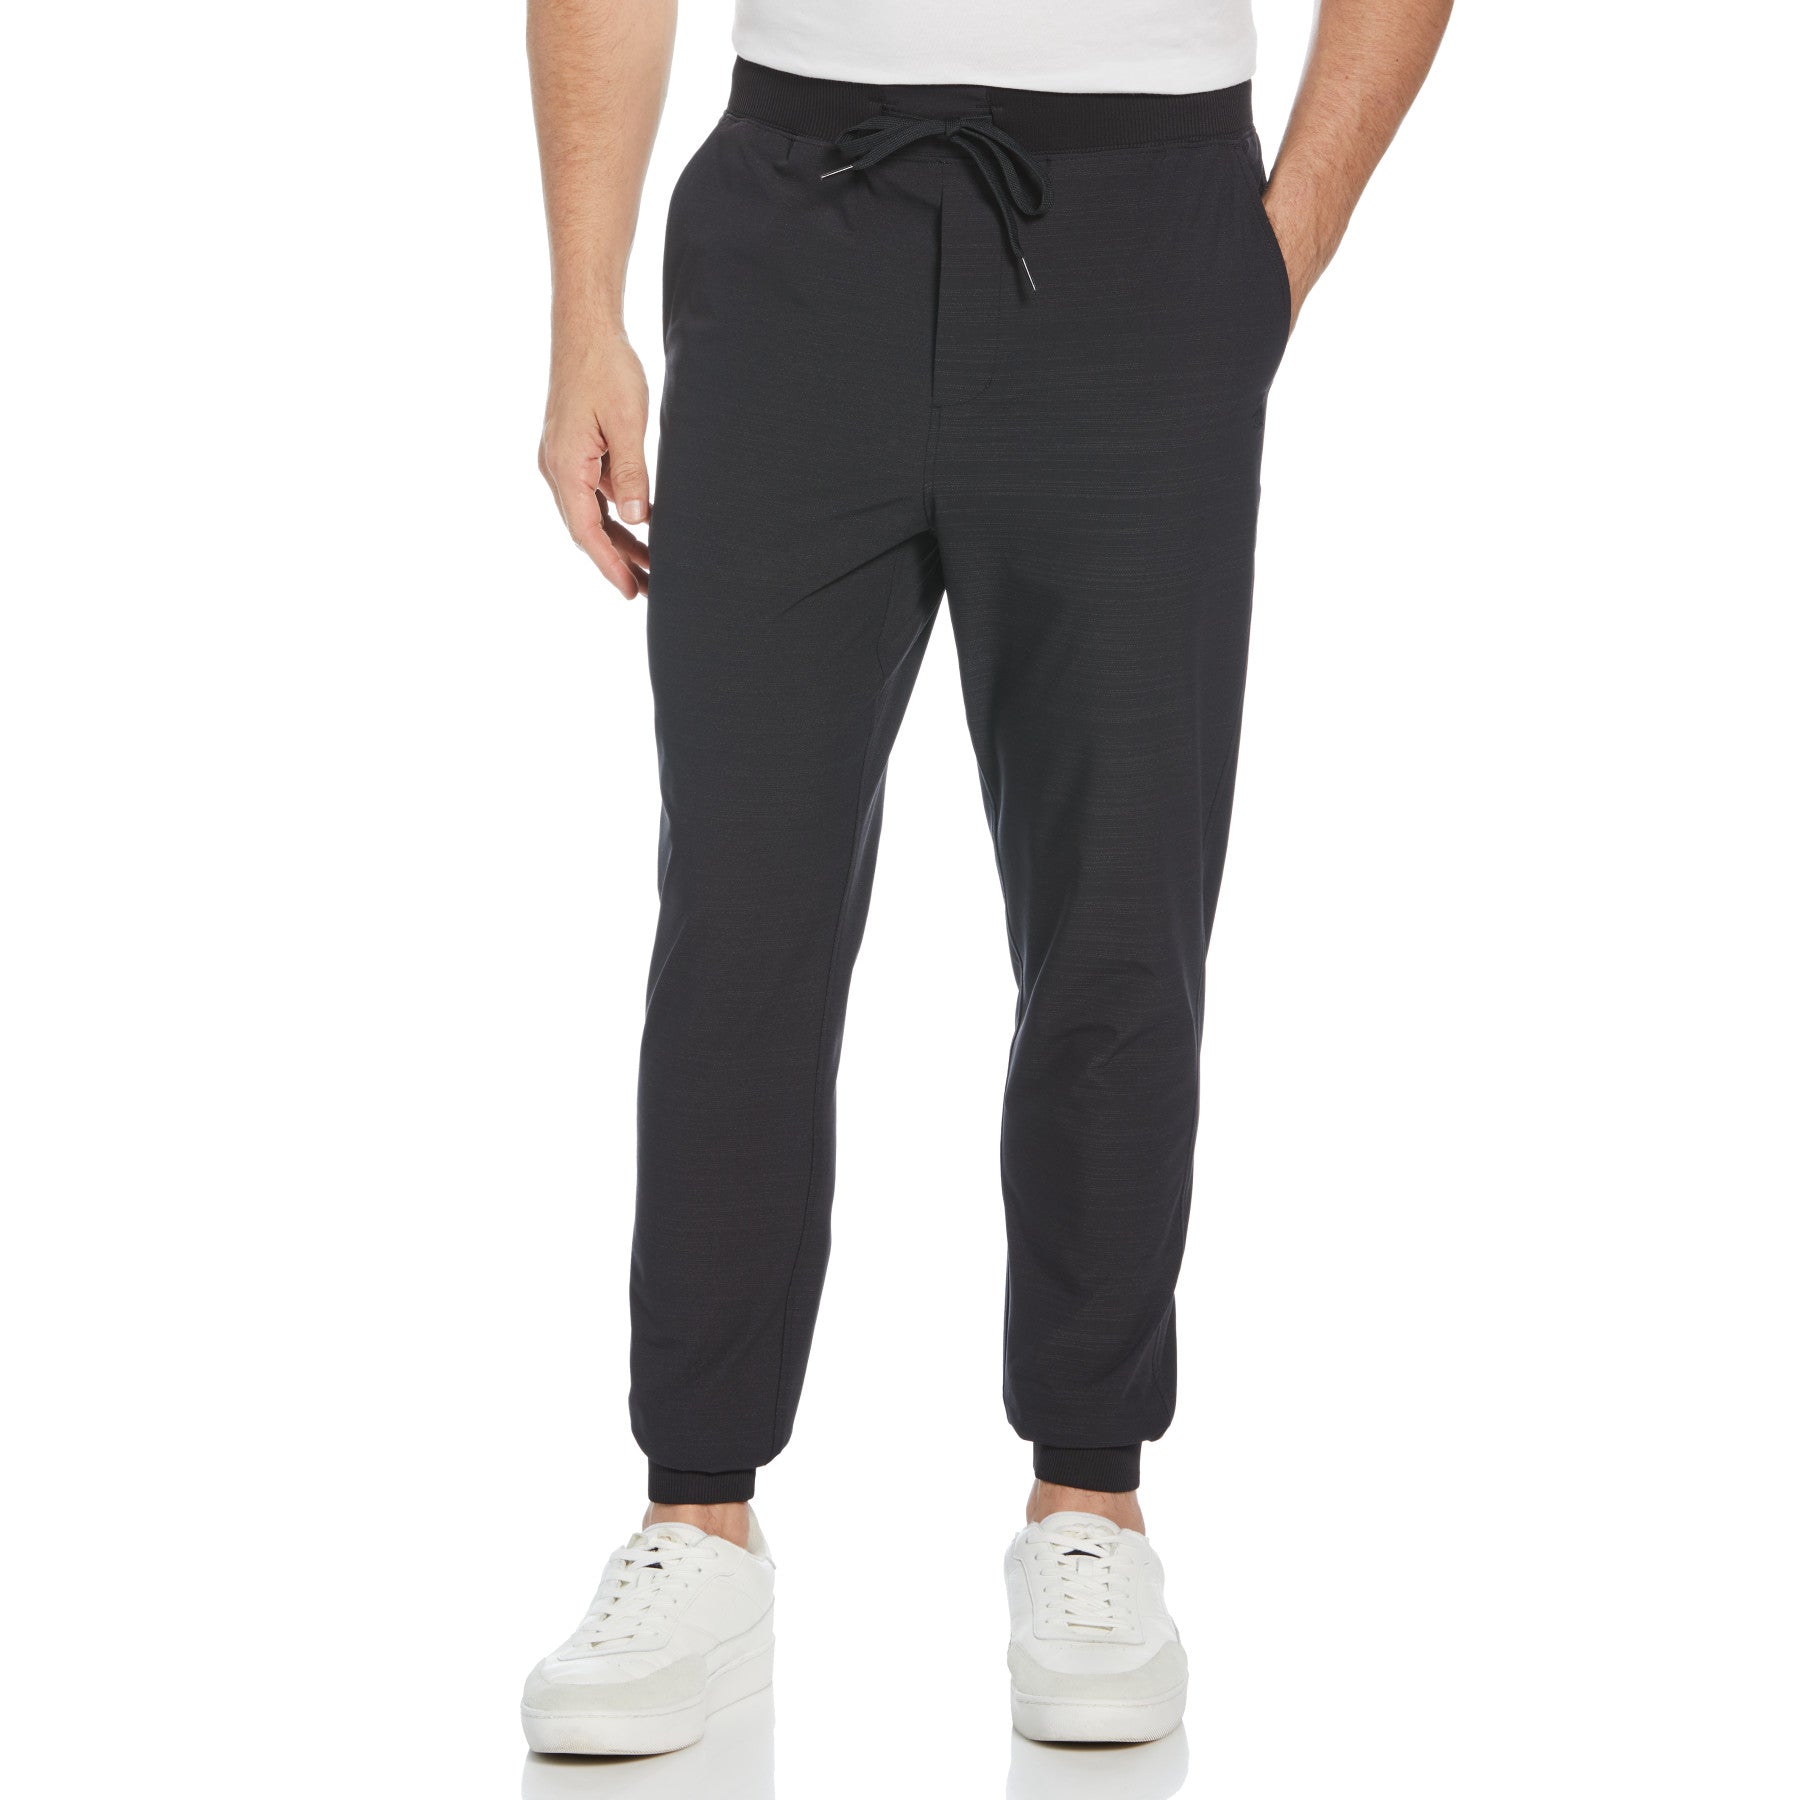 View Performance Crossover Golf Trouser In Caviar information